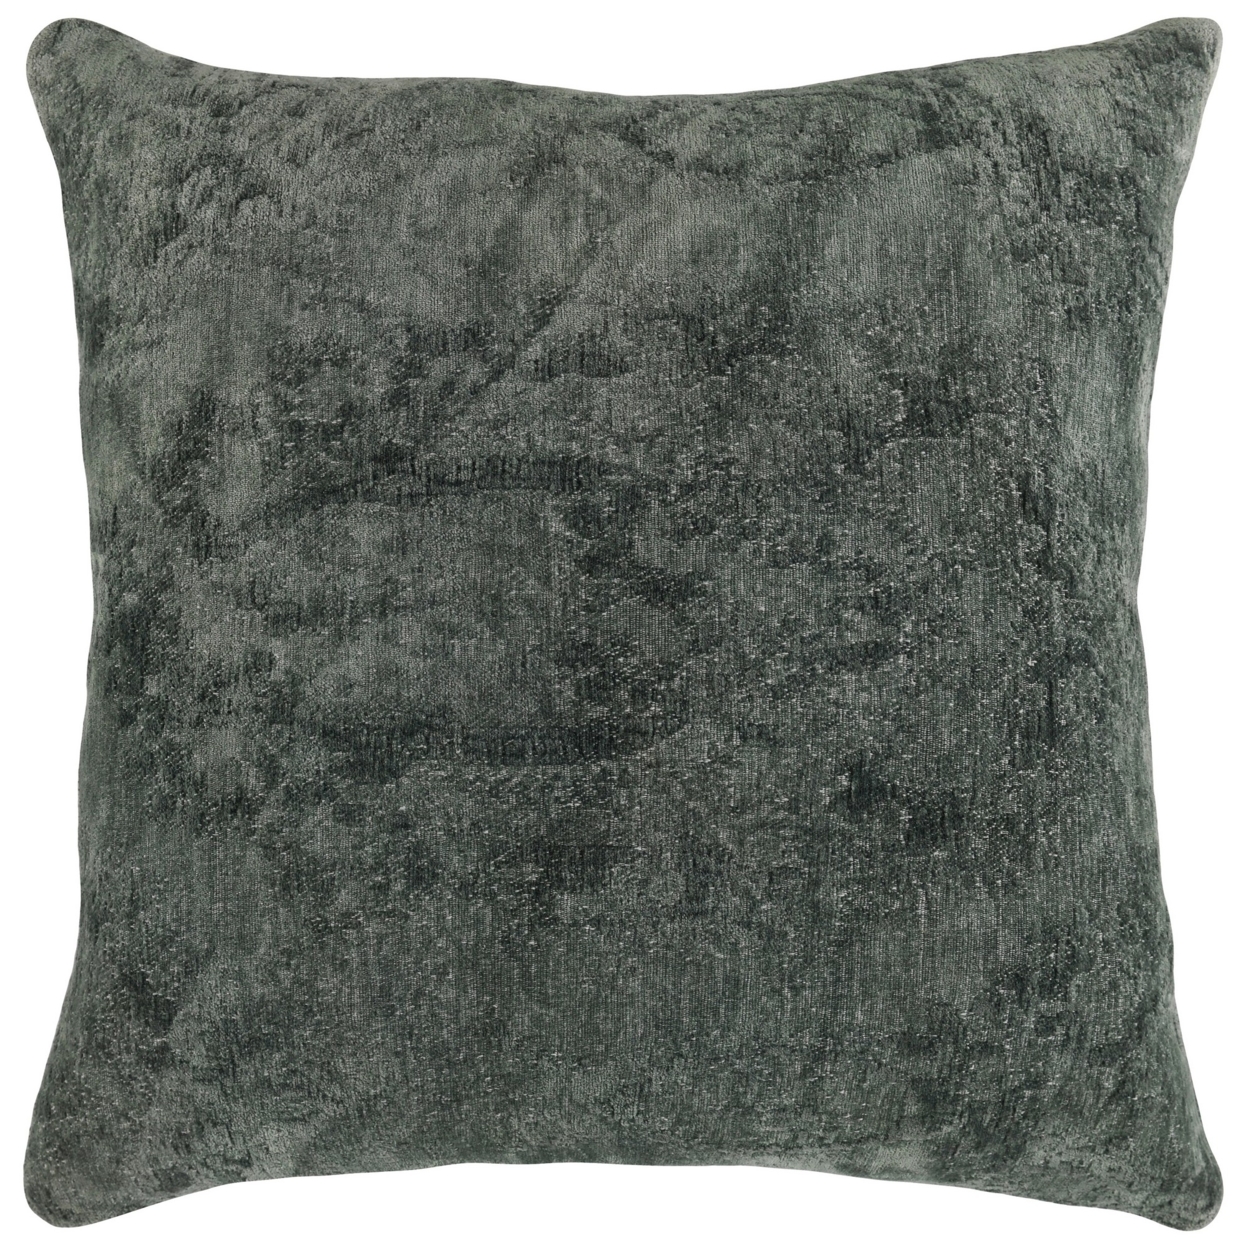 Piper 22 Inch Square Accent Throw Pillow, Handcrafted Dark Green Jacquard- Saltoro Sherpi